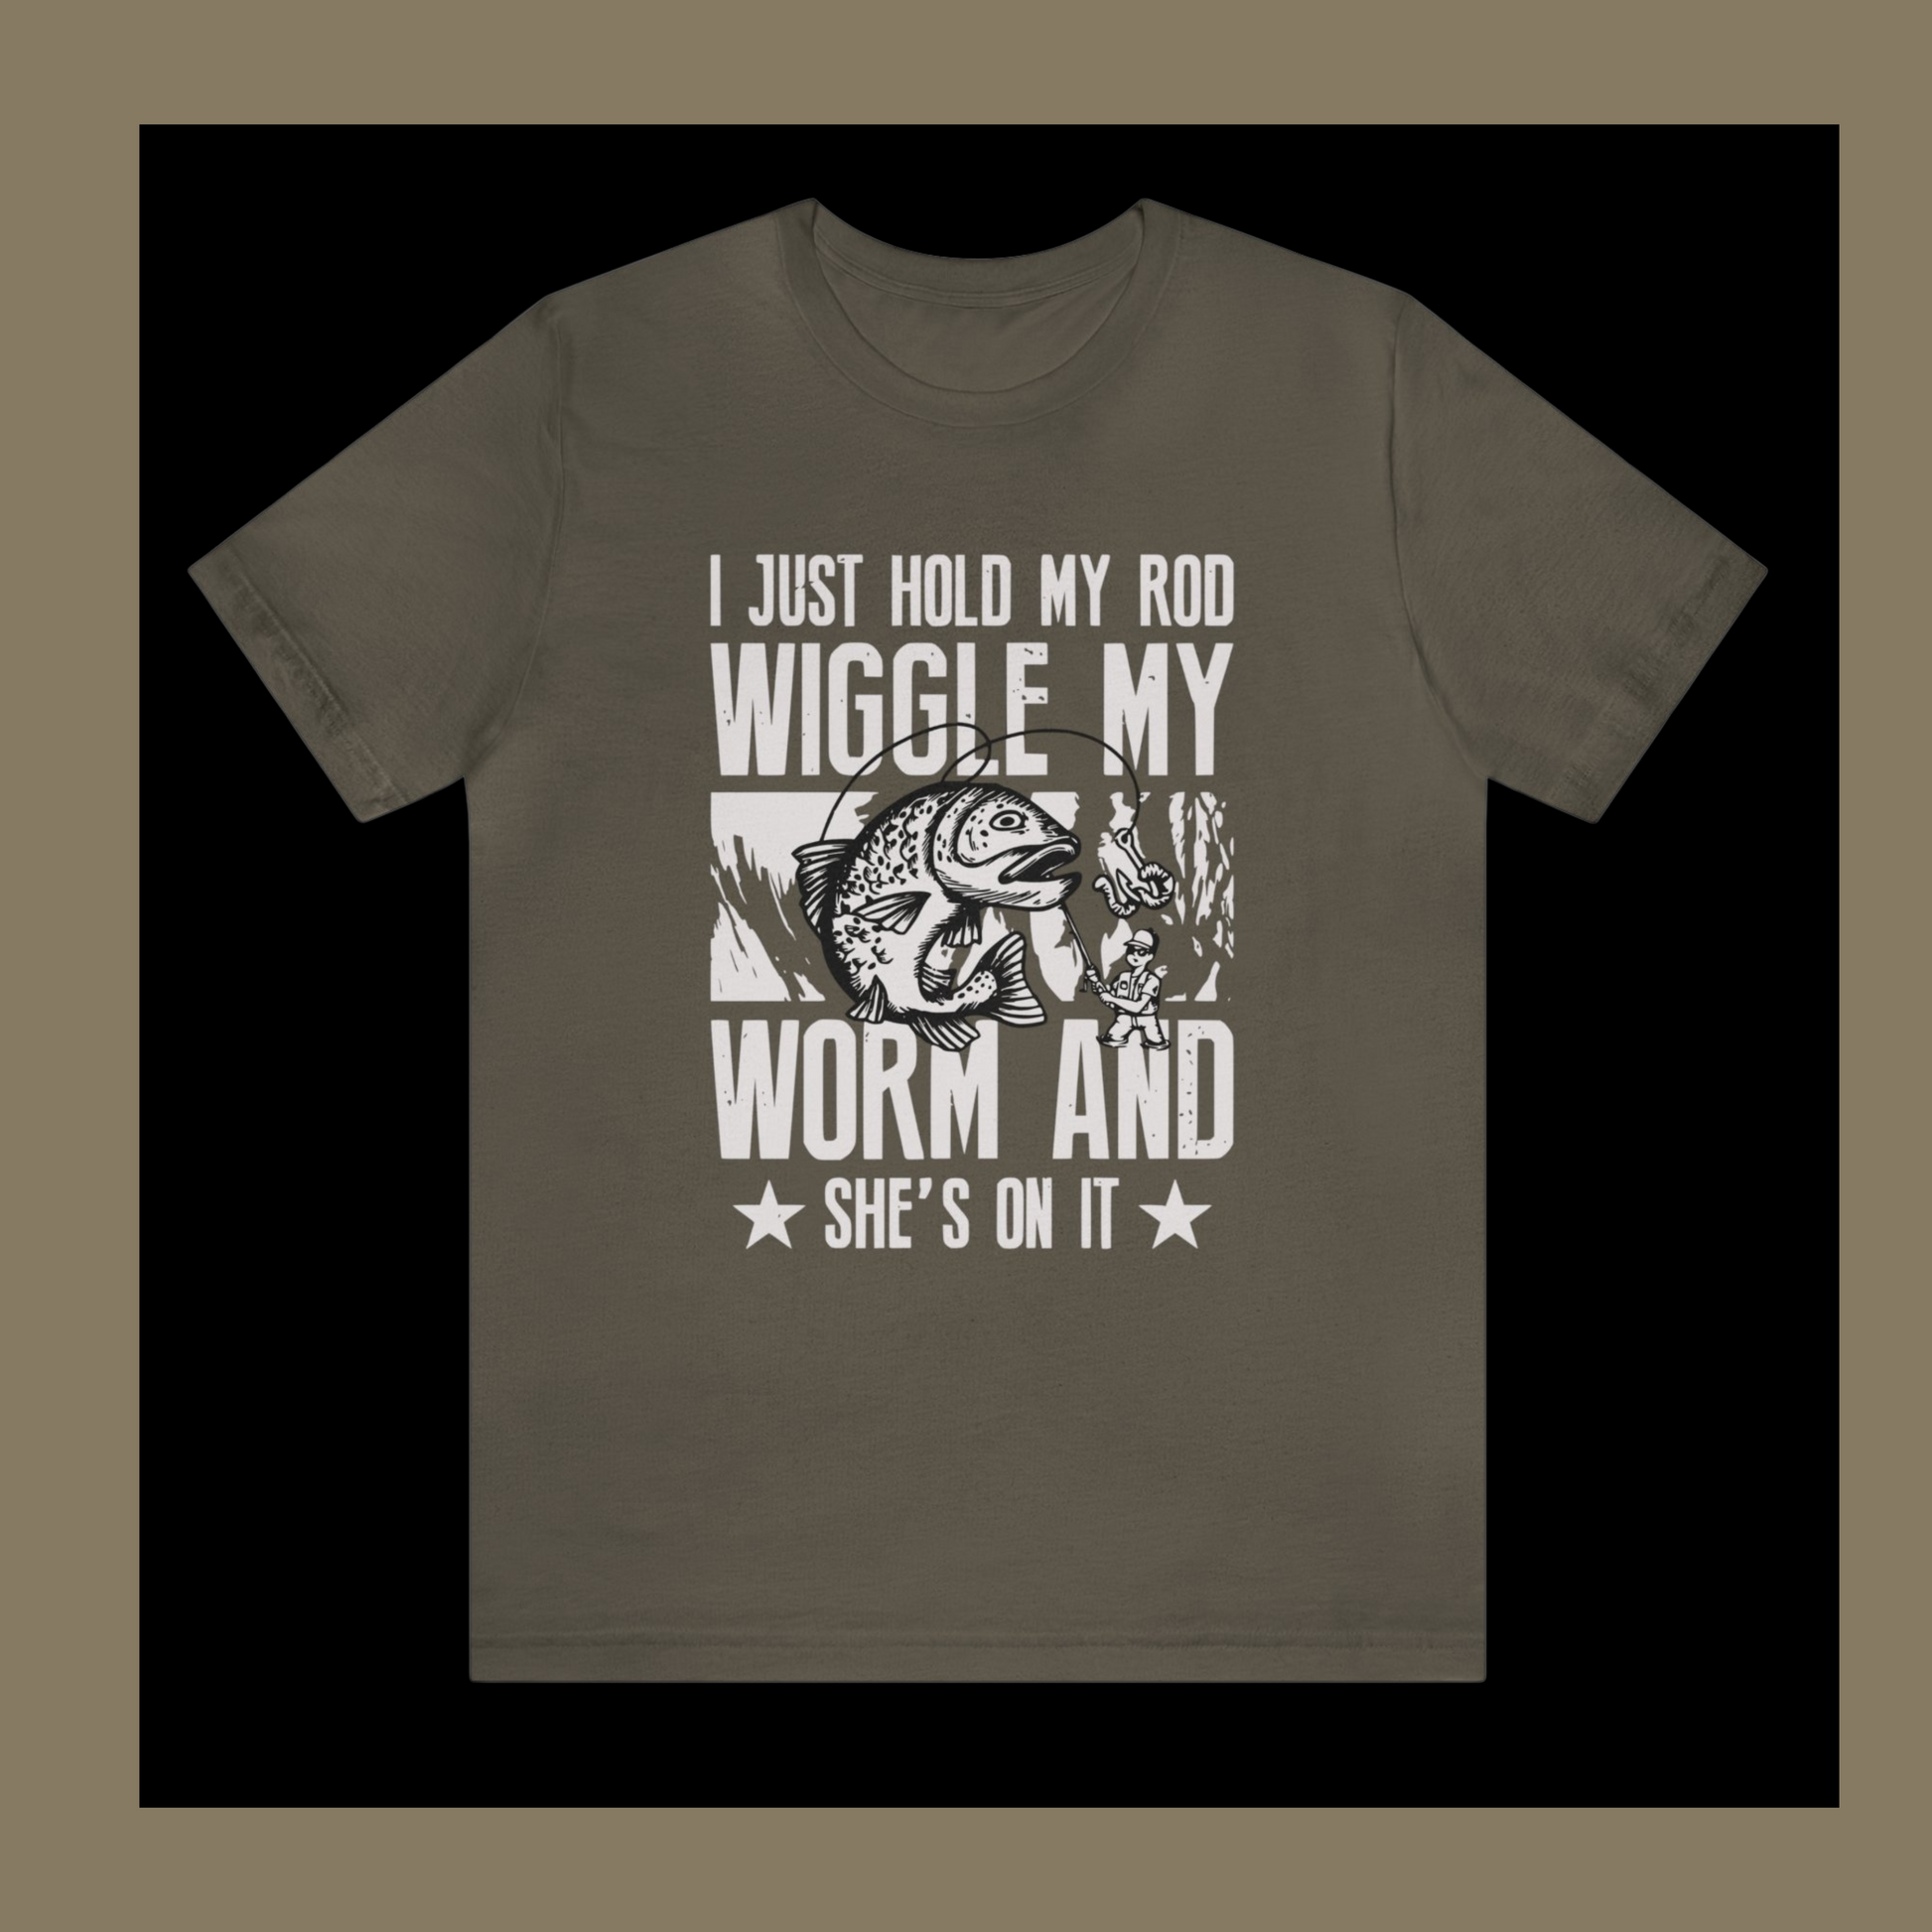 I Just Hold My Rod and Wiggle My Worm Tee, Reel Seducers Delight, Gift for Fishing Enthusiasts, Men's Fishing Shirt, Funny Dad Gifts - Canadohta Custom Creations LLC